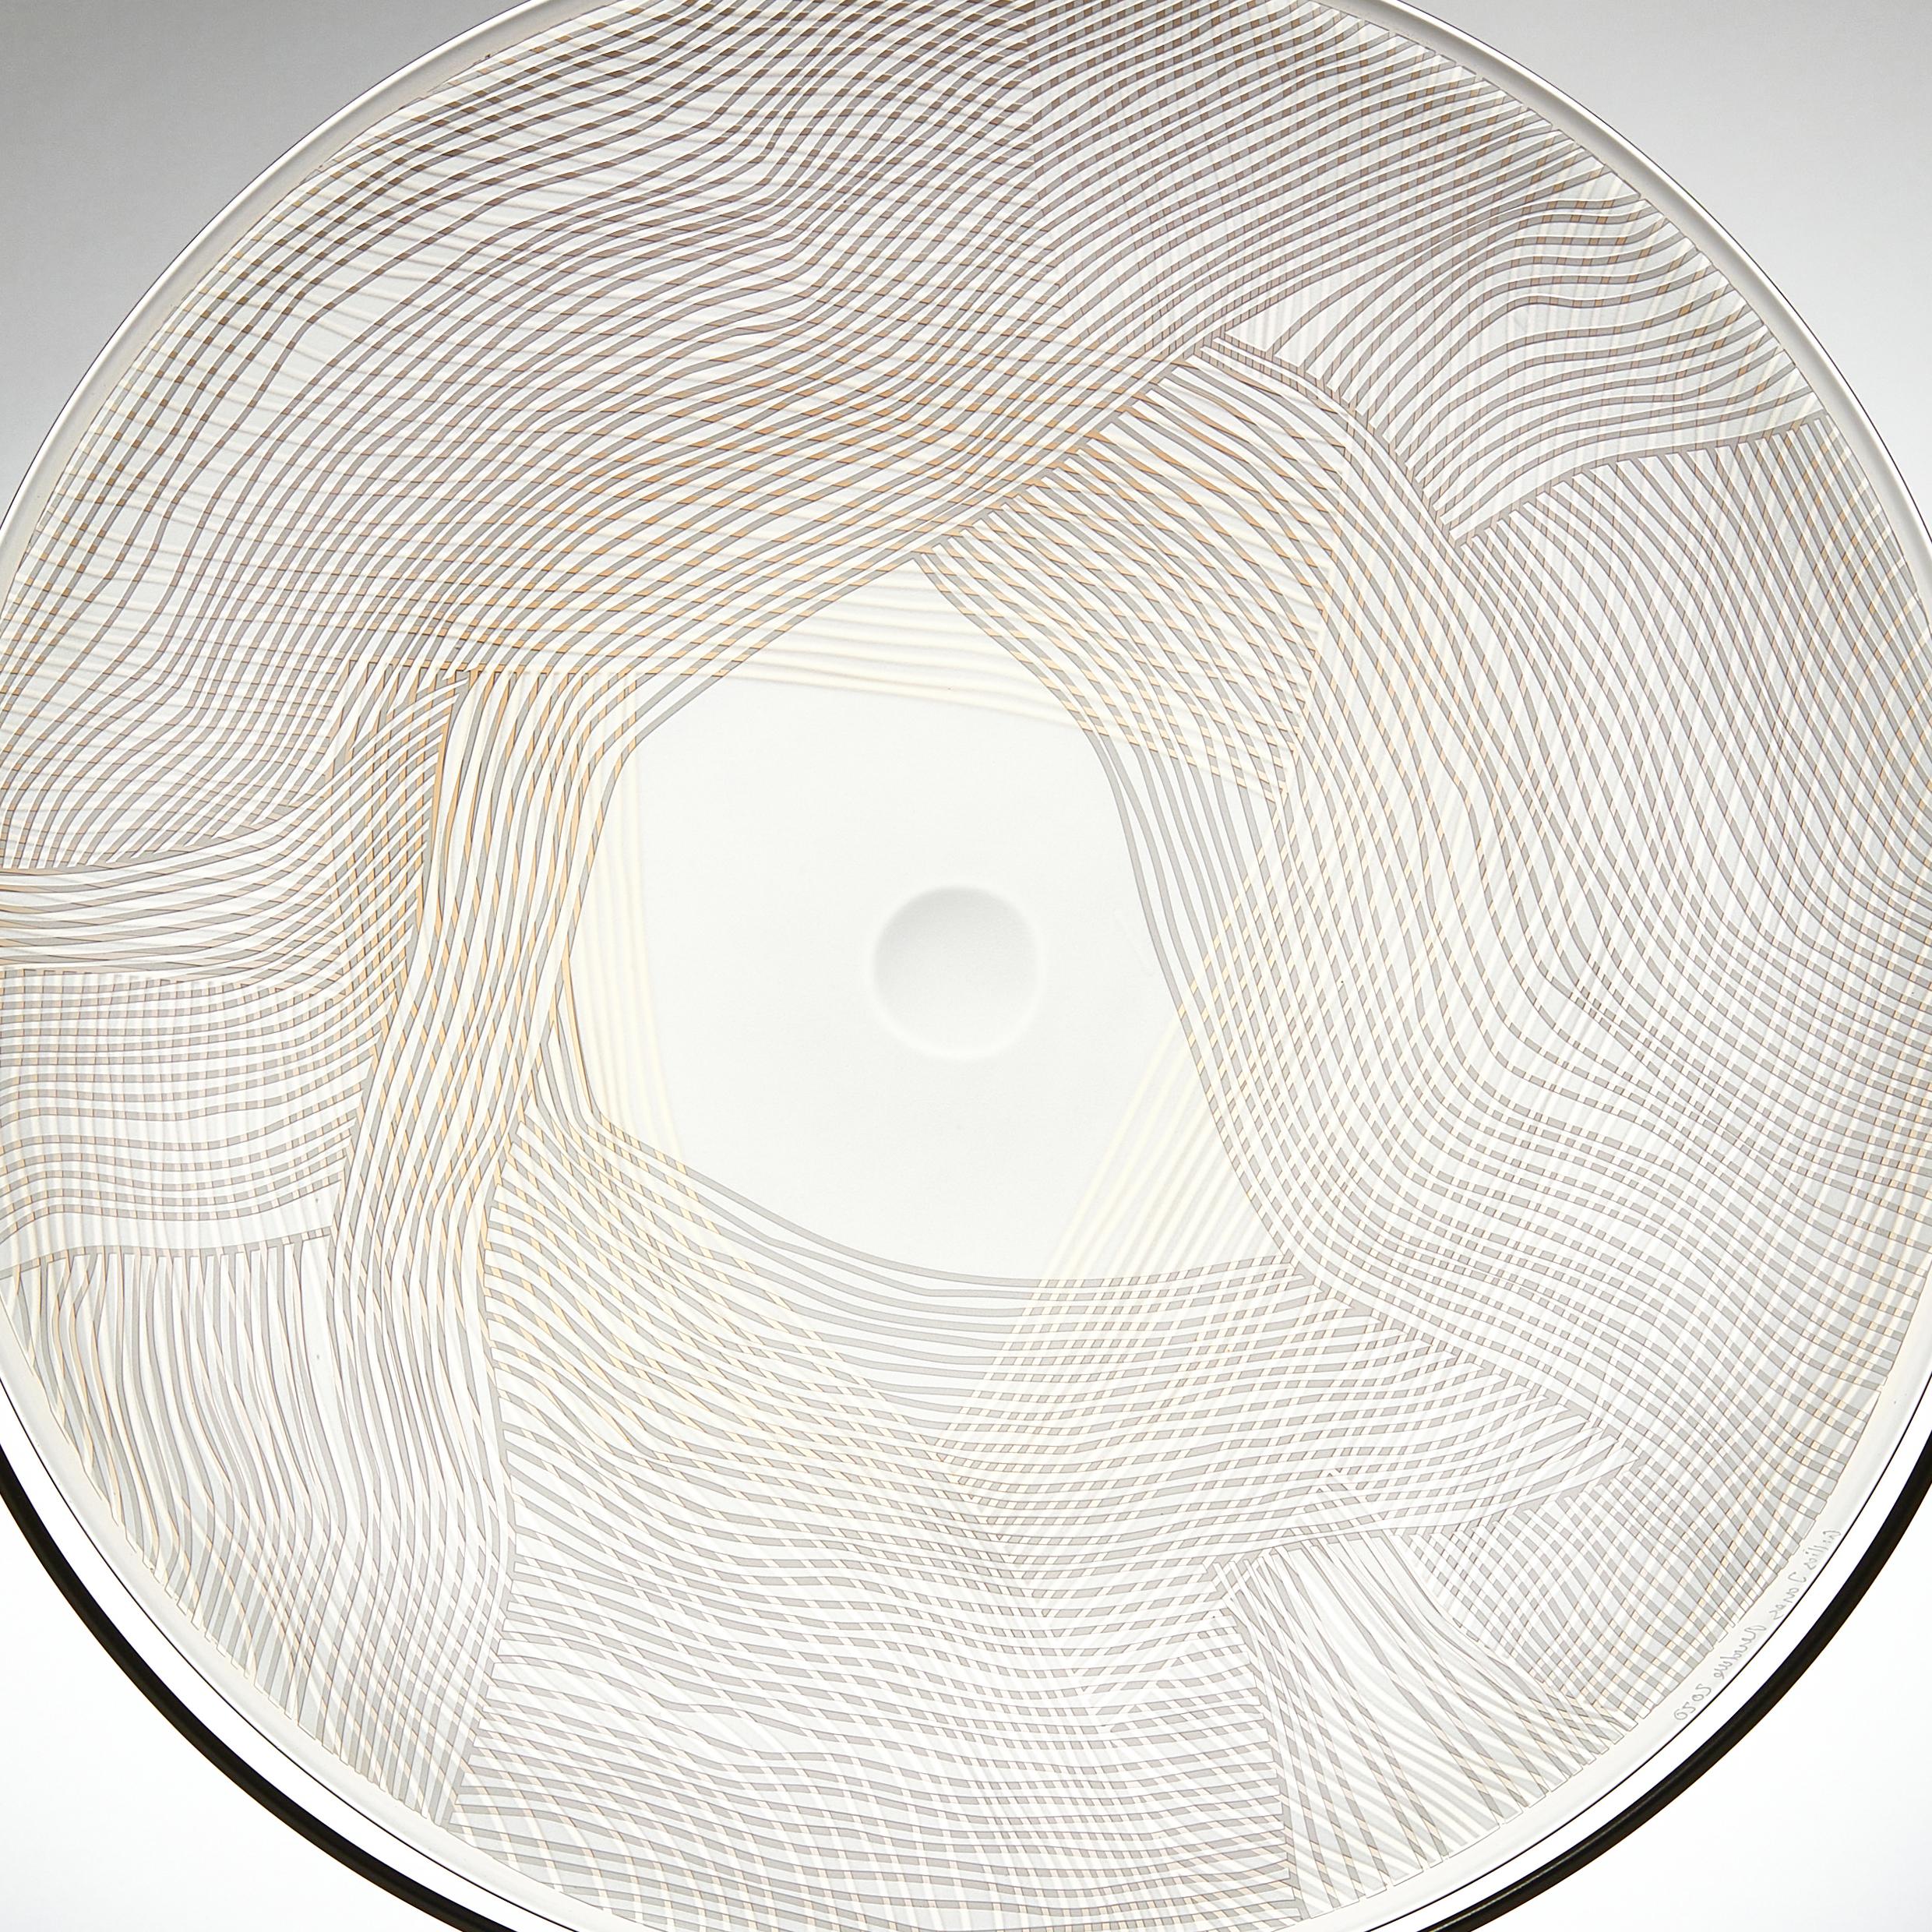 Organic Modern Layer on Layer, a Unique Gold, Grey and Clear Glass Sculptural Plate, Kate Jones